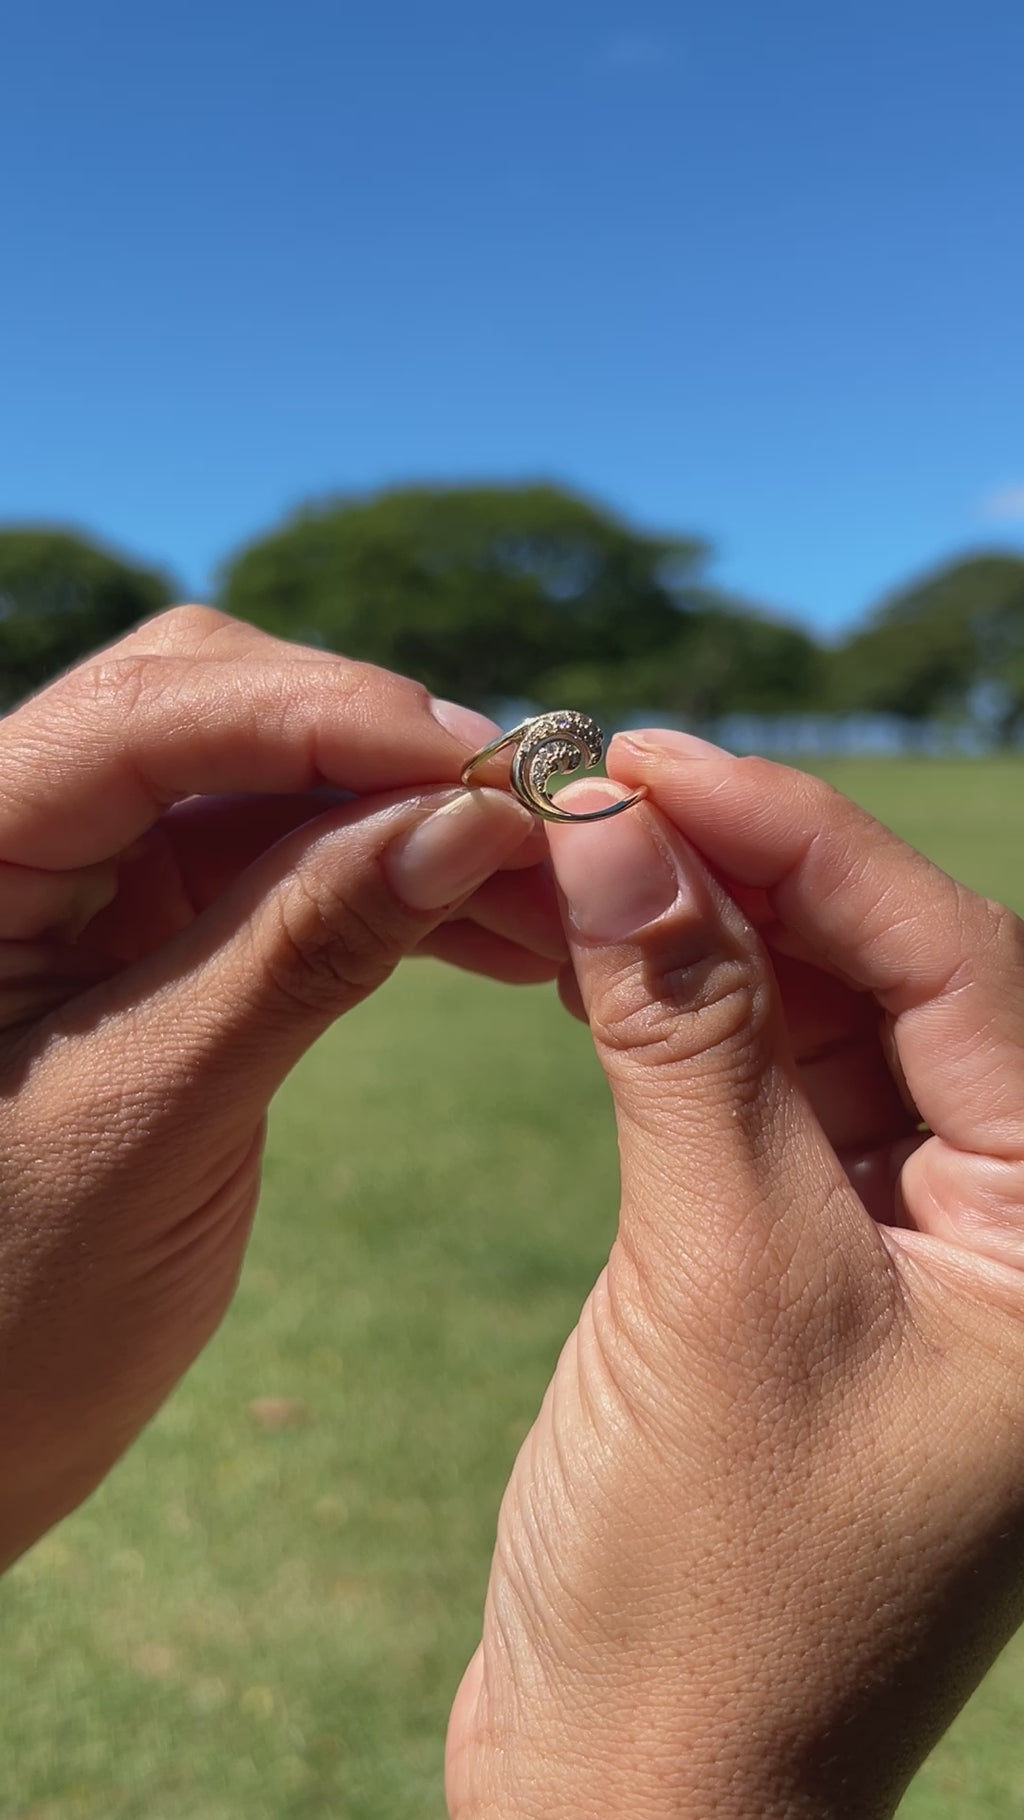 A video of a woman's hand with a Nalu Ring in Gold with Diamonds on it - Maui Divers Jewelry